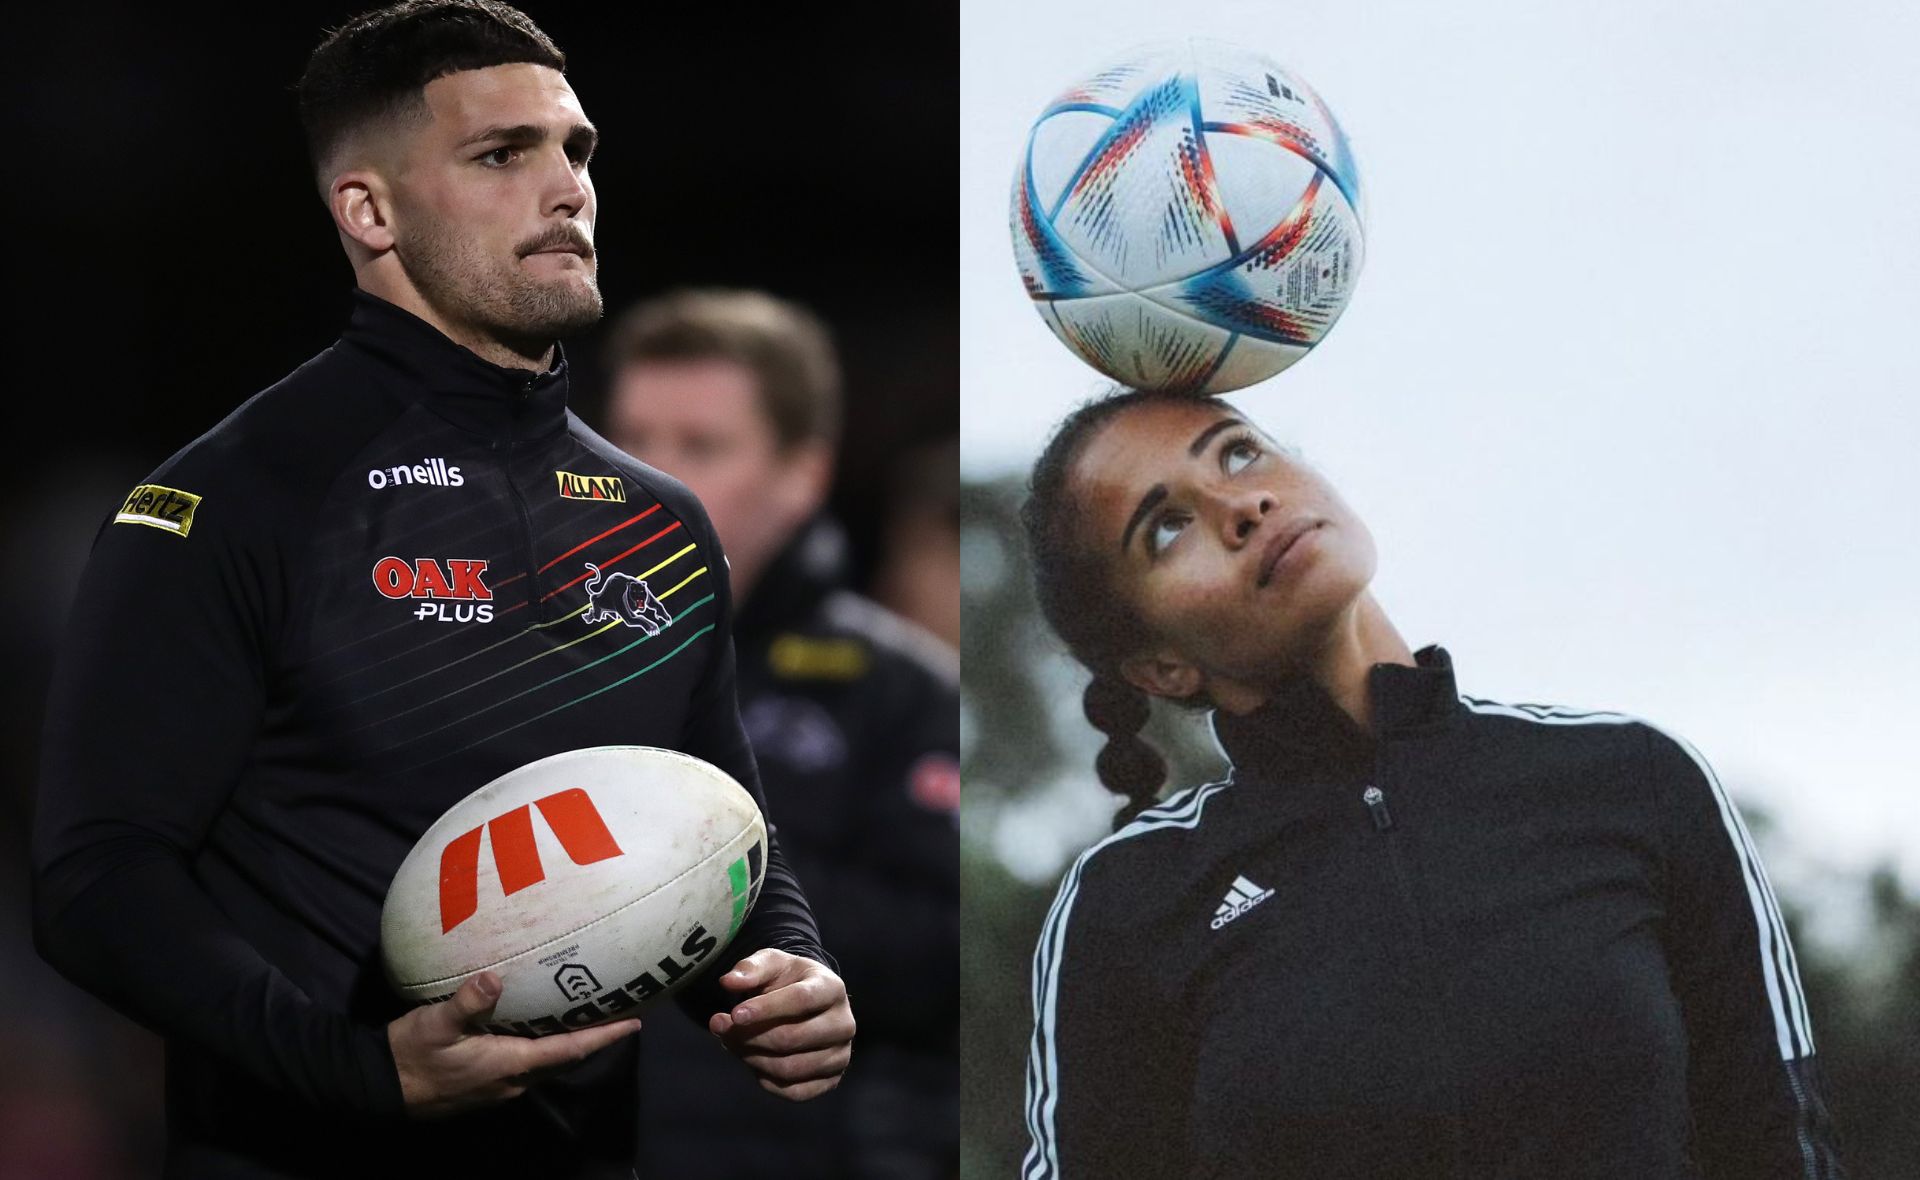 Matildas star Mary Fowler and Nathan Cleary are the ultimate sporting power couple